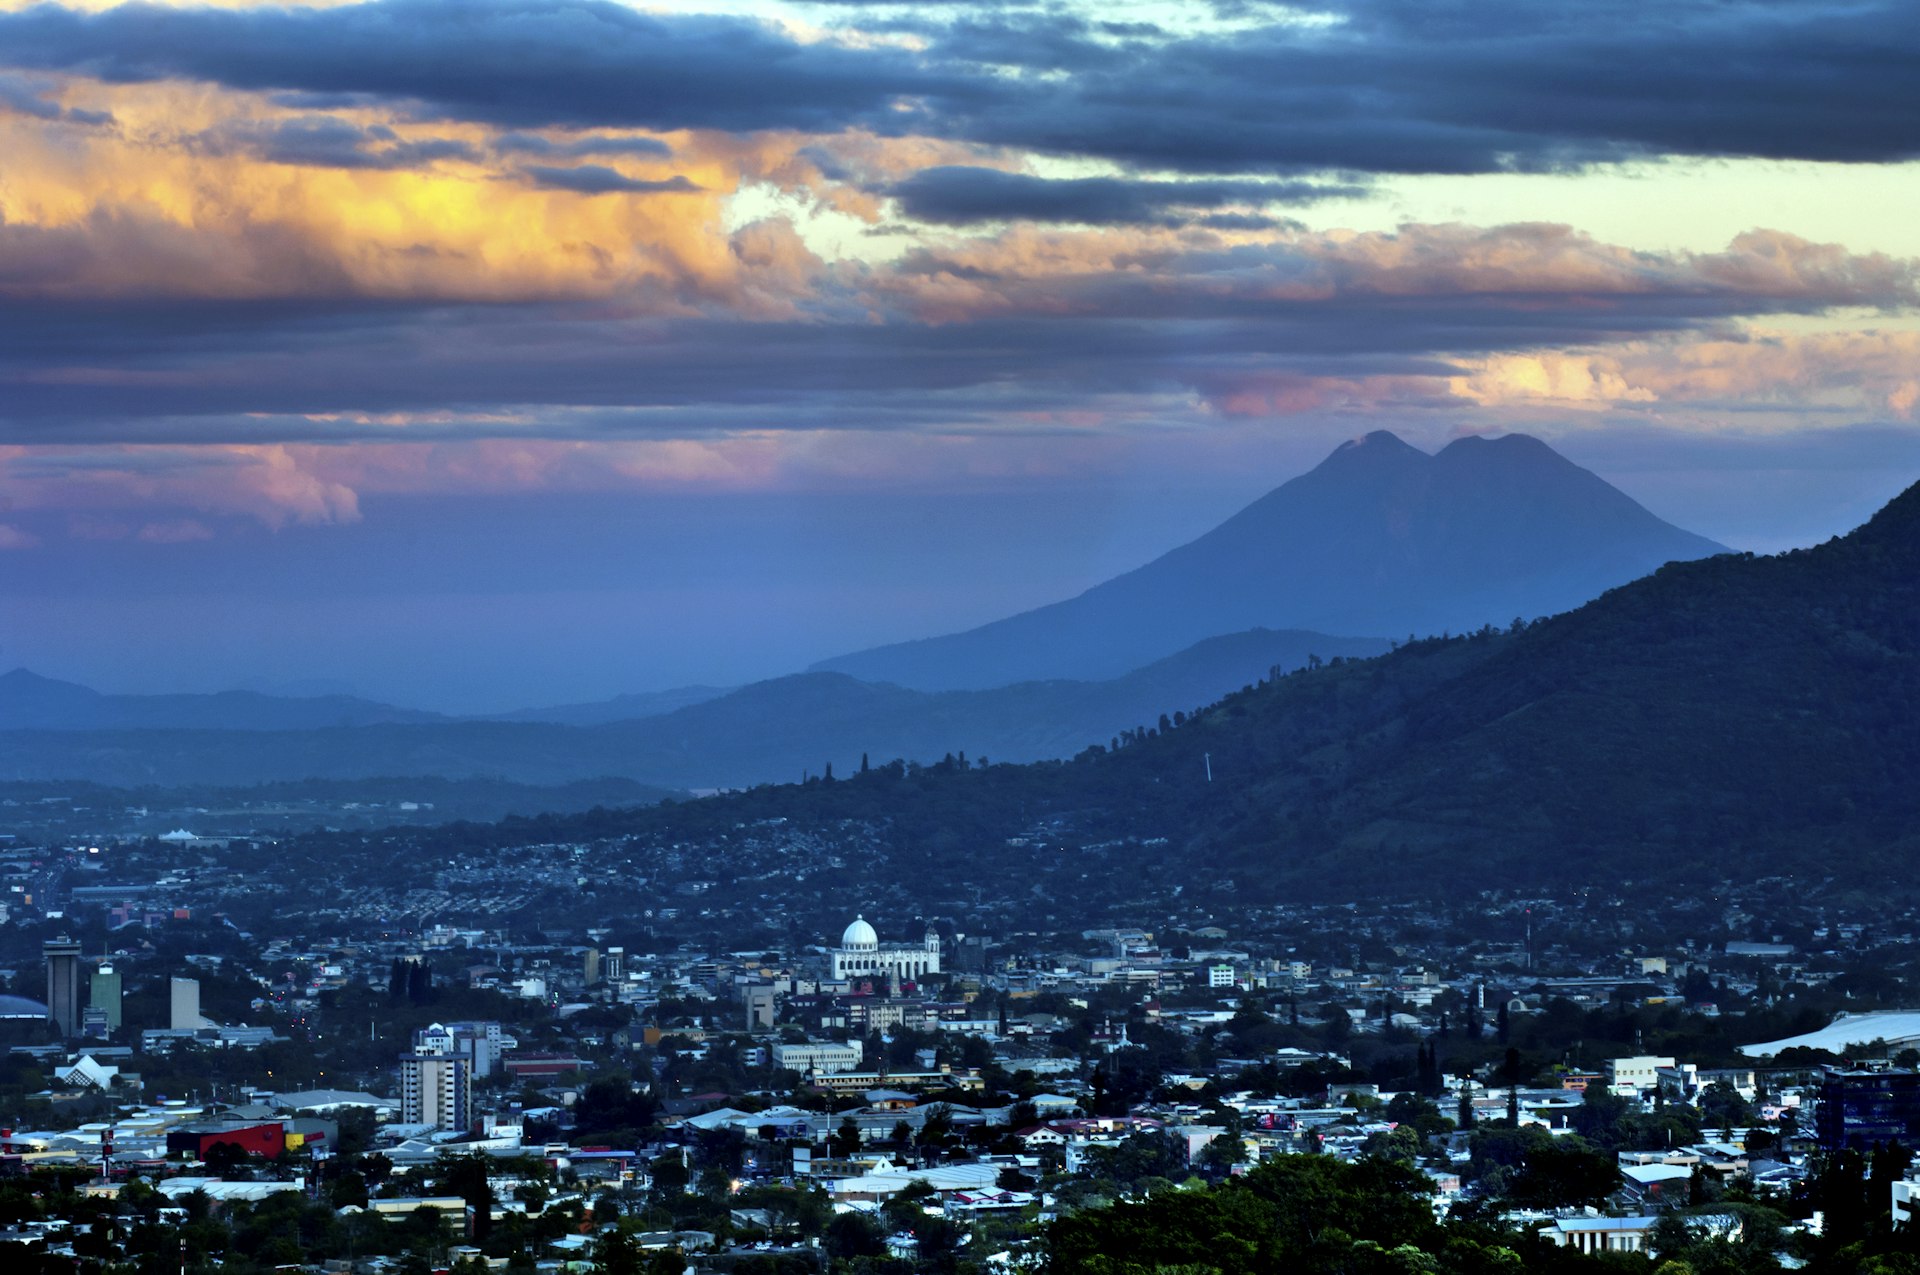 A wide sunset view of the skyline of San Salvador (including the white-domed Metropolitan Cathedral Of The Holy Savior) with the volcano El Boquerón’s peaks in the distance, El Salvador